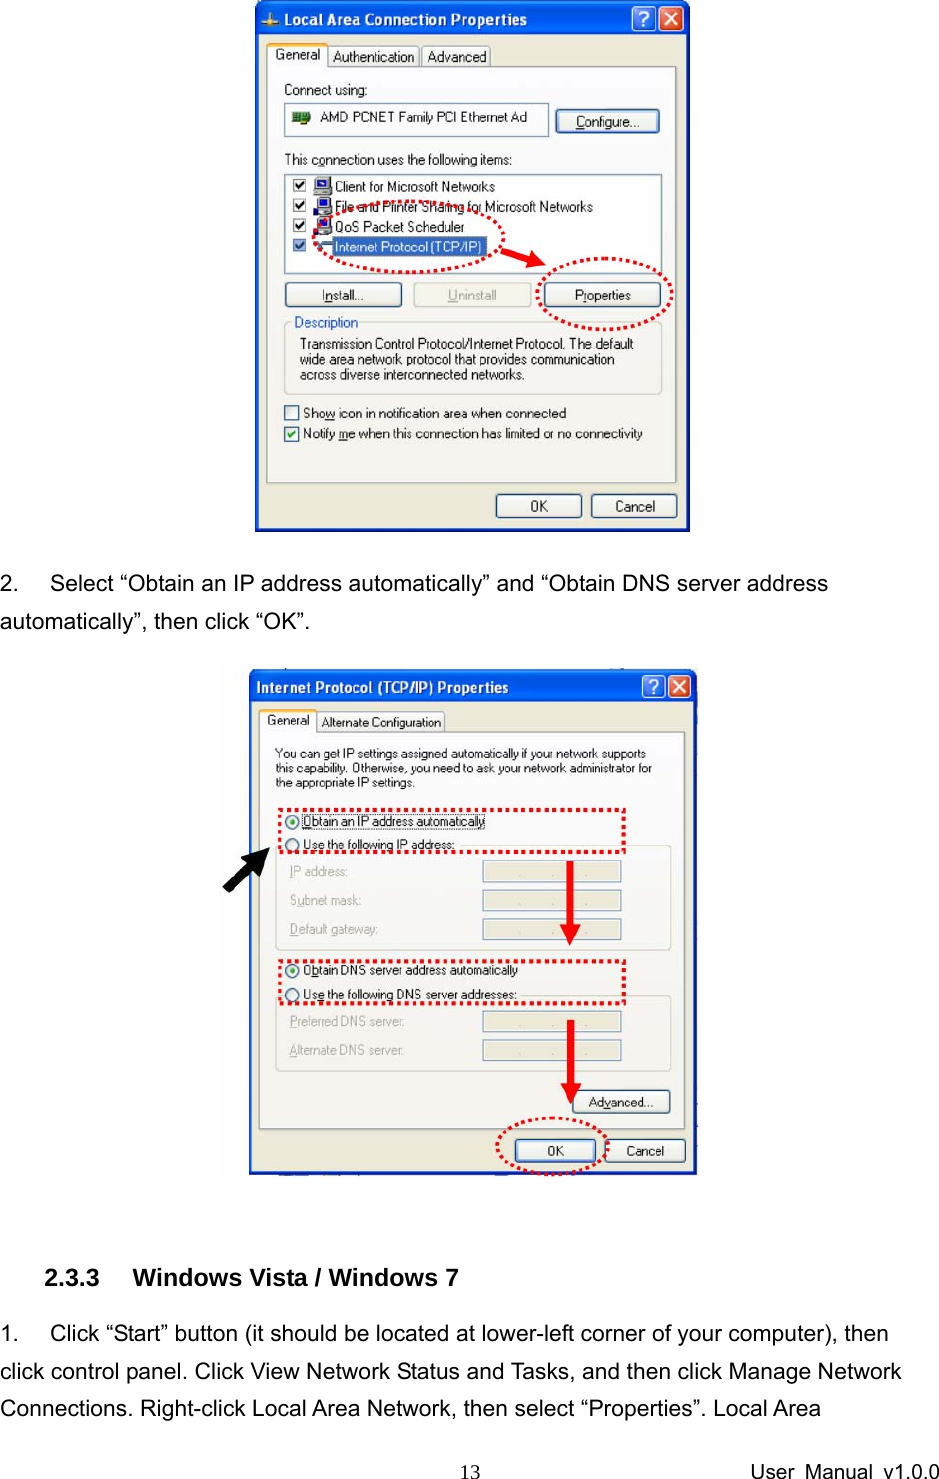                 User Manual v1.0.0 13 2.  Select “Obtain an IP address automatically” and “Obtain DNS server address automatically”, then click “OK”.   2.3.3  Windows Vista / Windows 7 1.  Click “Start” button (it should be located at lower-left corner of your computer), then click control panel. Click View Network Status and Tasks, and then click Manage Network Connections. Right-click Local Area Network, then select “Properties”. Local Area 